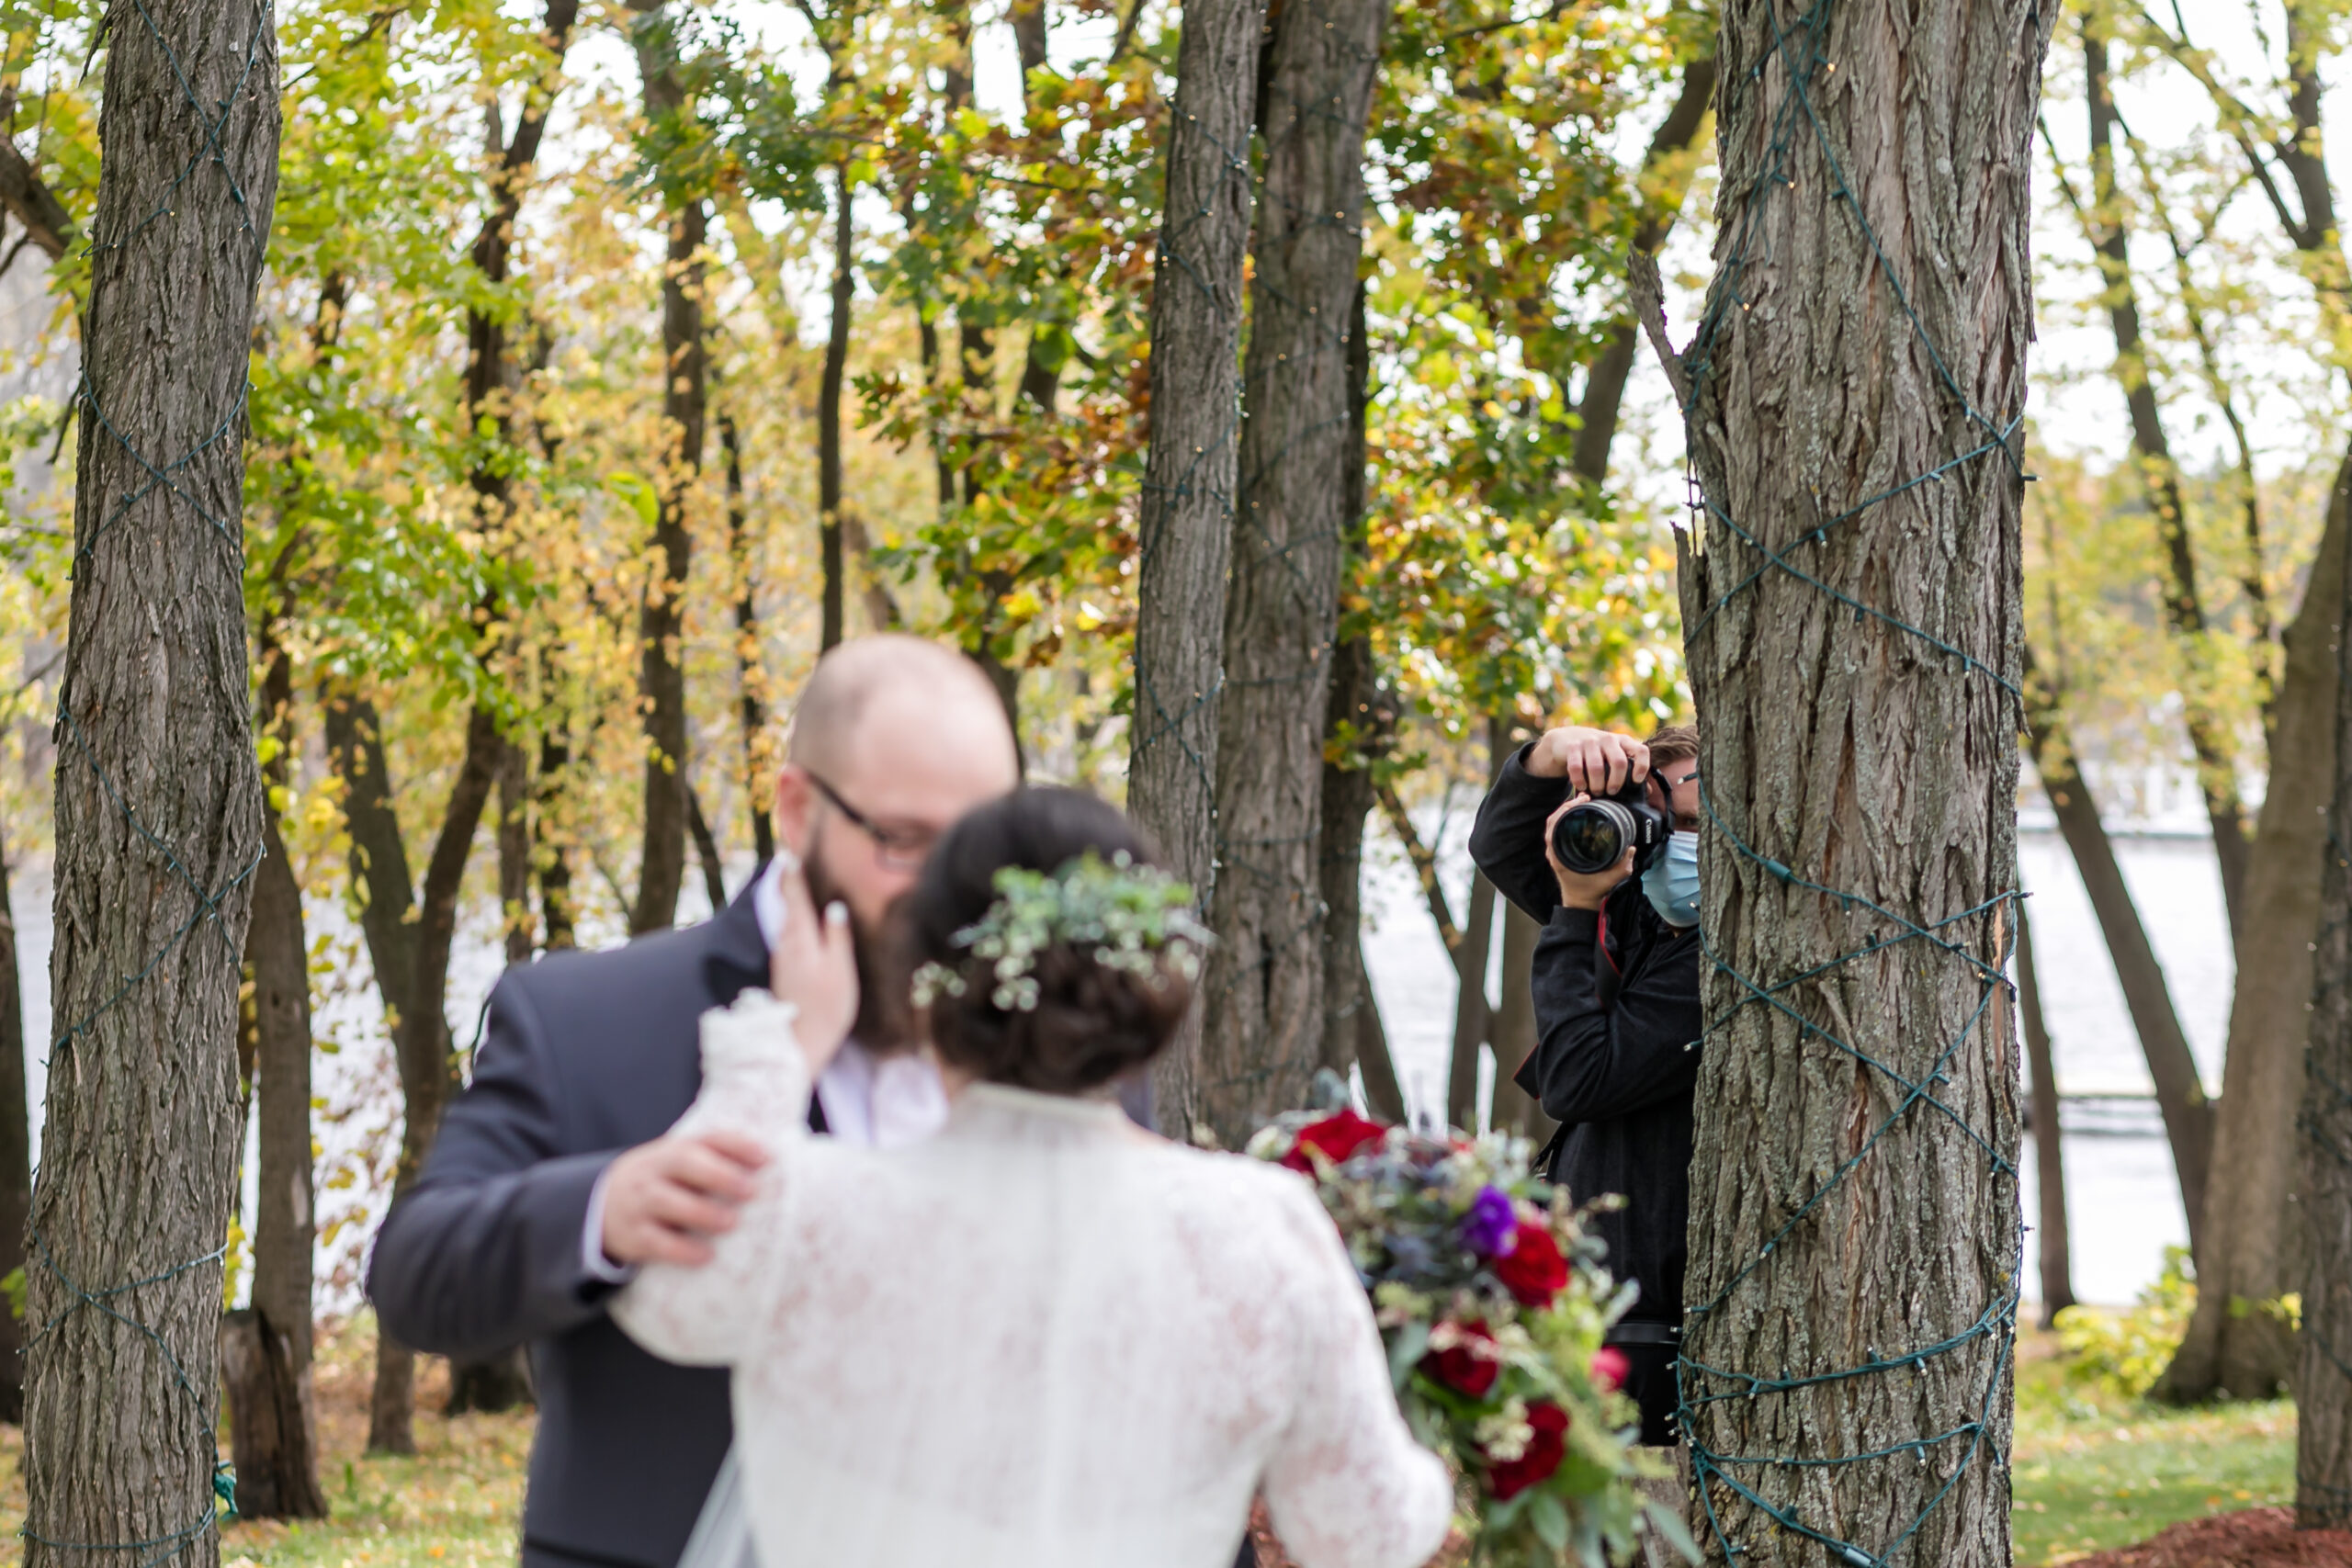 ben branson at celebrations on the river getting a second angle of a bride and groom from behind a tree